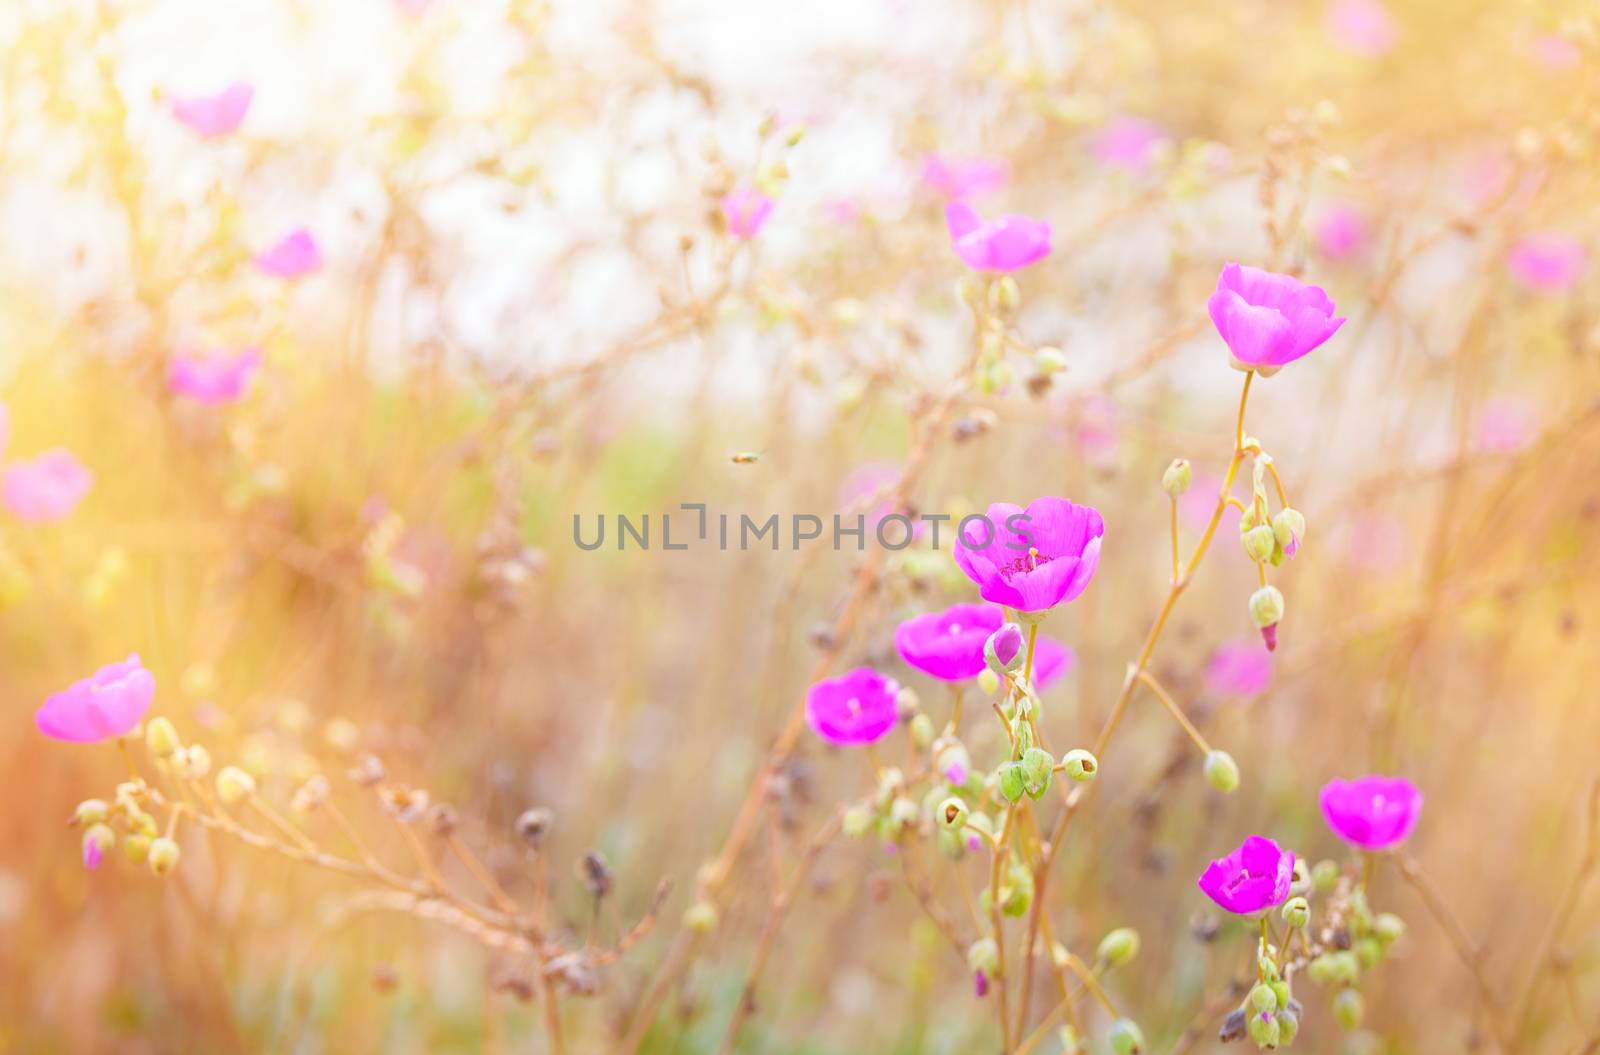 Beautiful pink poppies in grassy field with sunlight  streaming by jarenwicklund